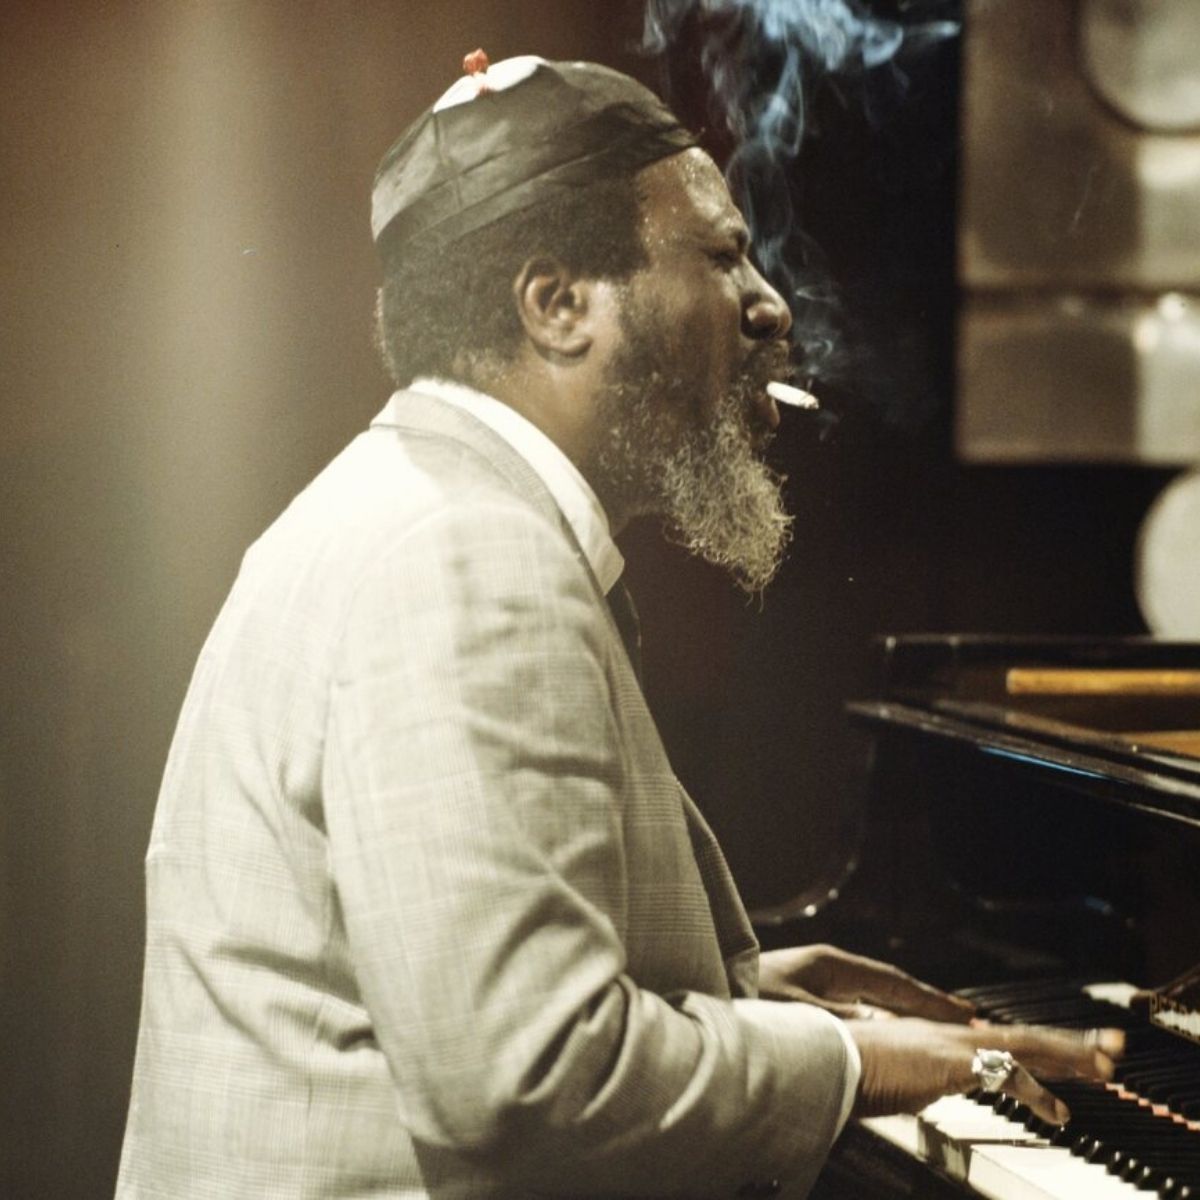 Thelonious Monk at one of his performances